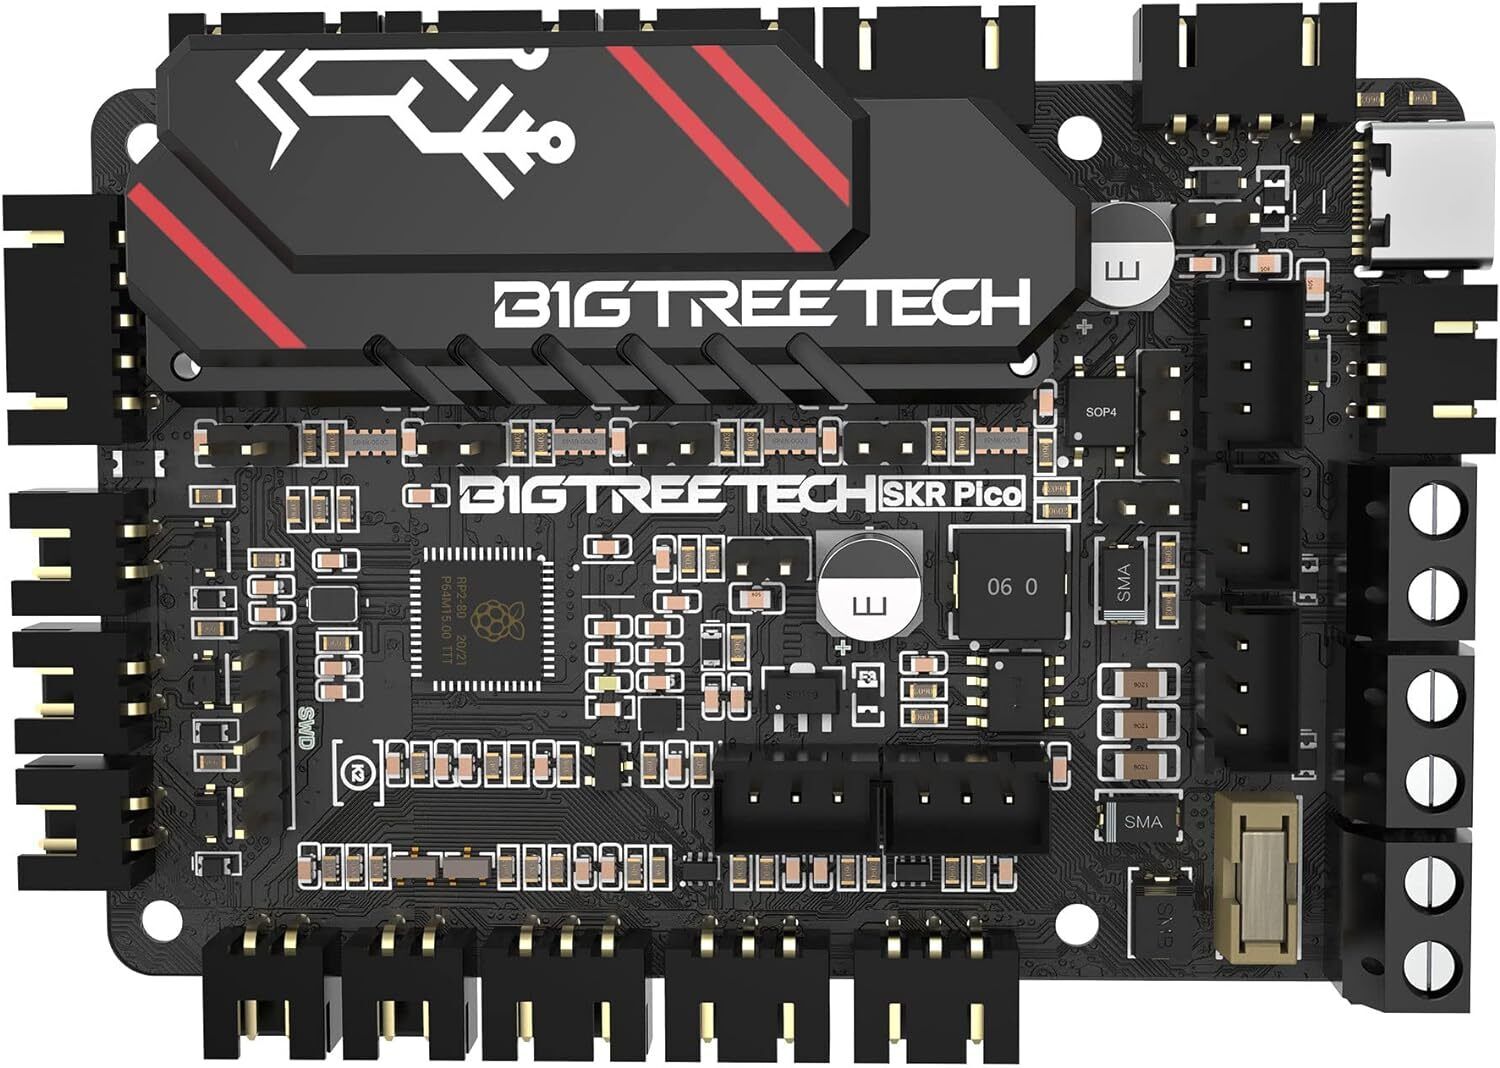 BIGTREETECH SKR Pico V1.0 Controller Board Perfectly Compatible with Voron... 